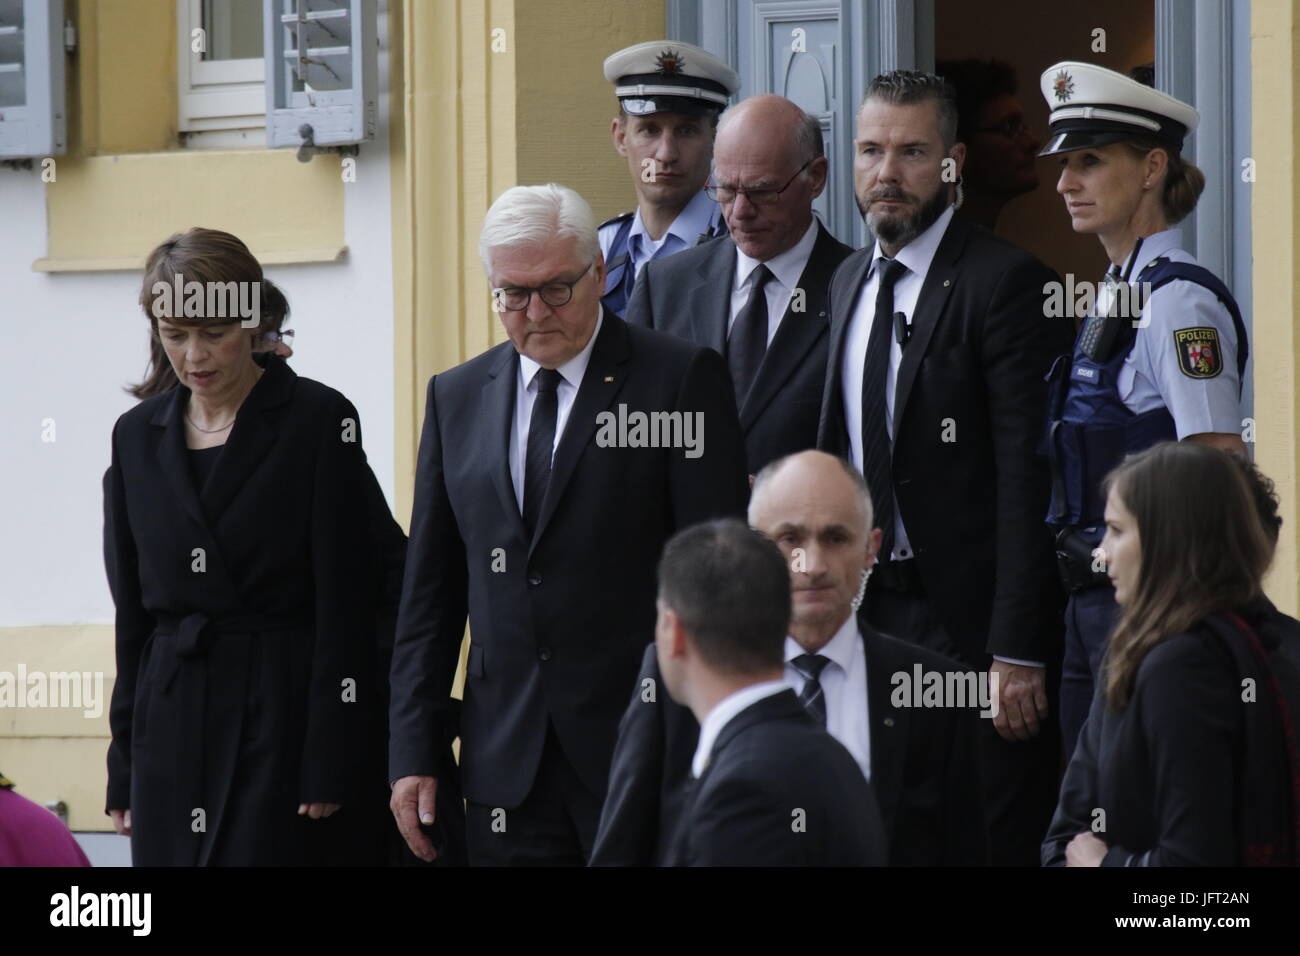 Speyer, Germany. 01st July, 2017. Frank-Walter Steinmeier (2nd left), the President of Germany, his wife Elke Budenbender (left) and Norbert Lammert, the President of the German Bundestag, walk to the Speyer Cathedral, A funeral mass for the former German Chancellor Helmut Kohl was held in the Cathedral of Speyer. it was attended by over 1000 invited guests and several thousand people followed the mass outside the Cathedral. Credit: Michael Debets/Pacific Press/Alamy Live News Stock Photo